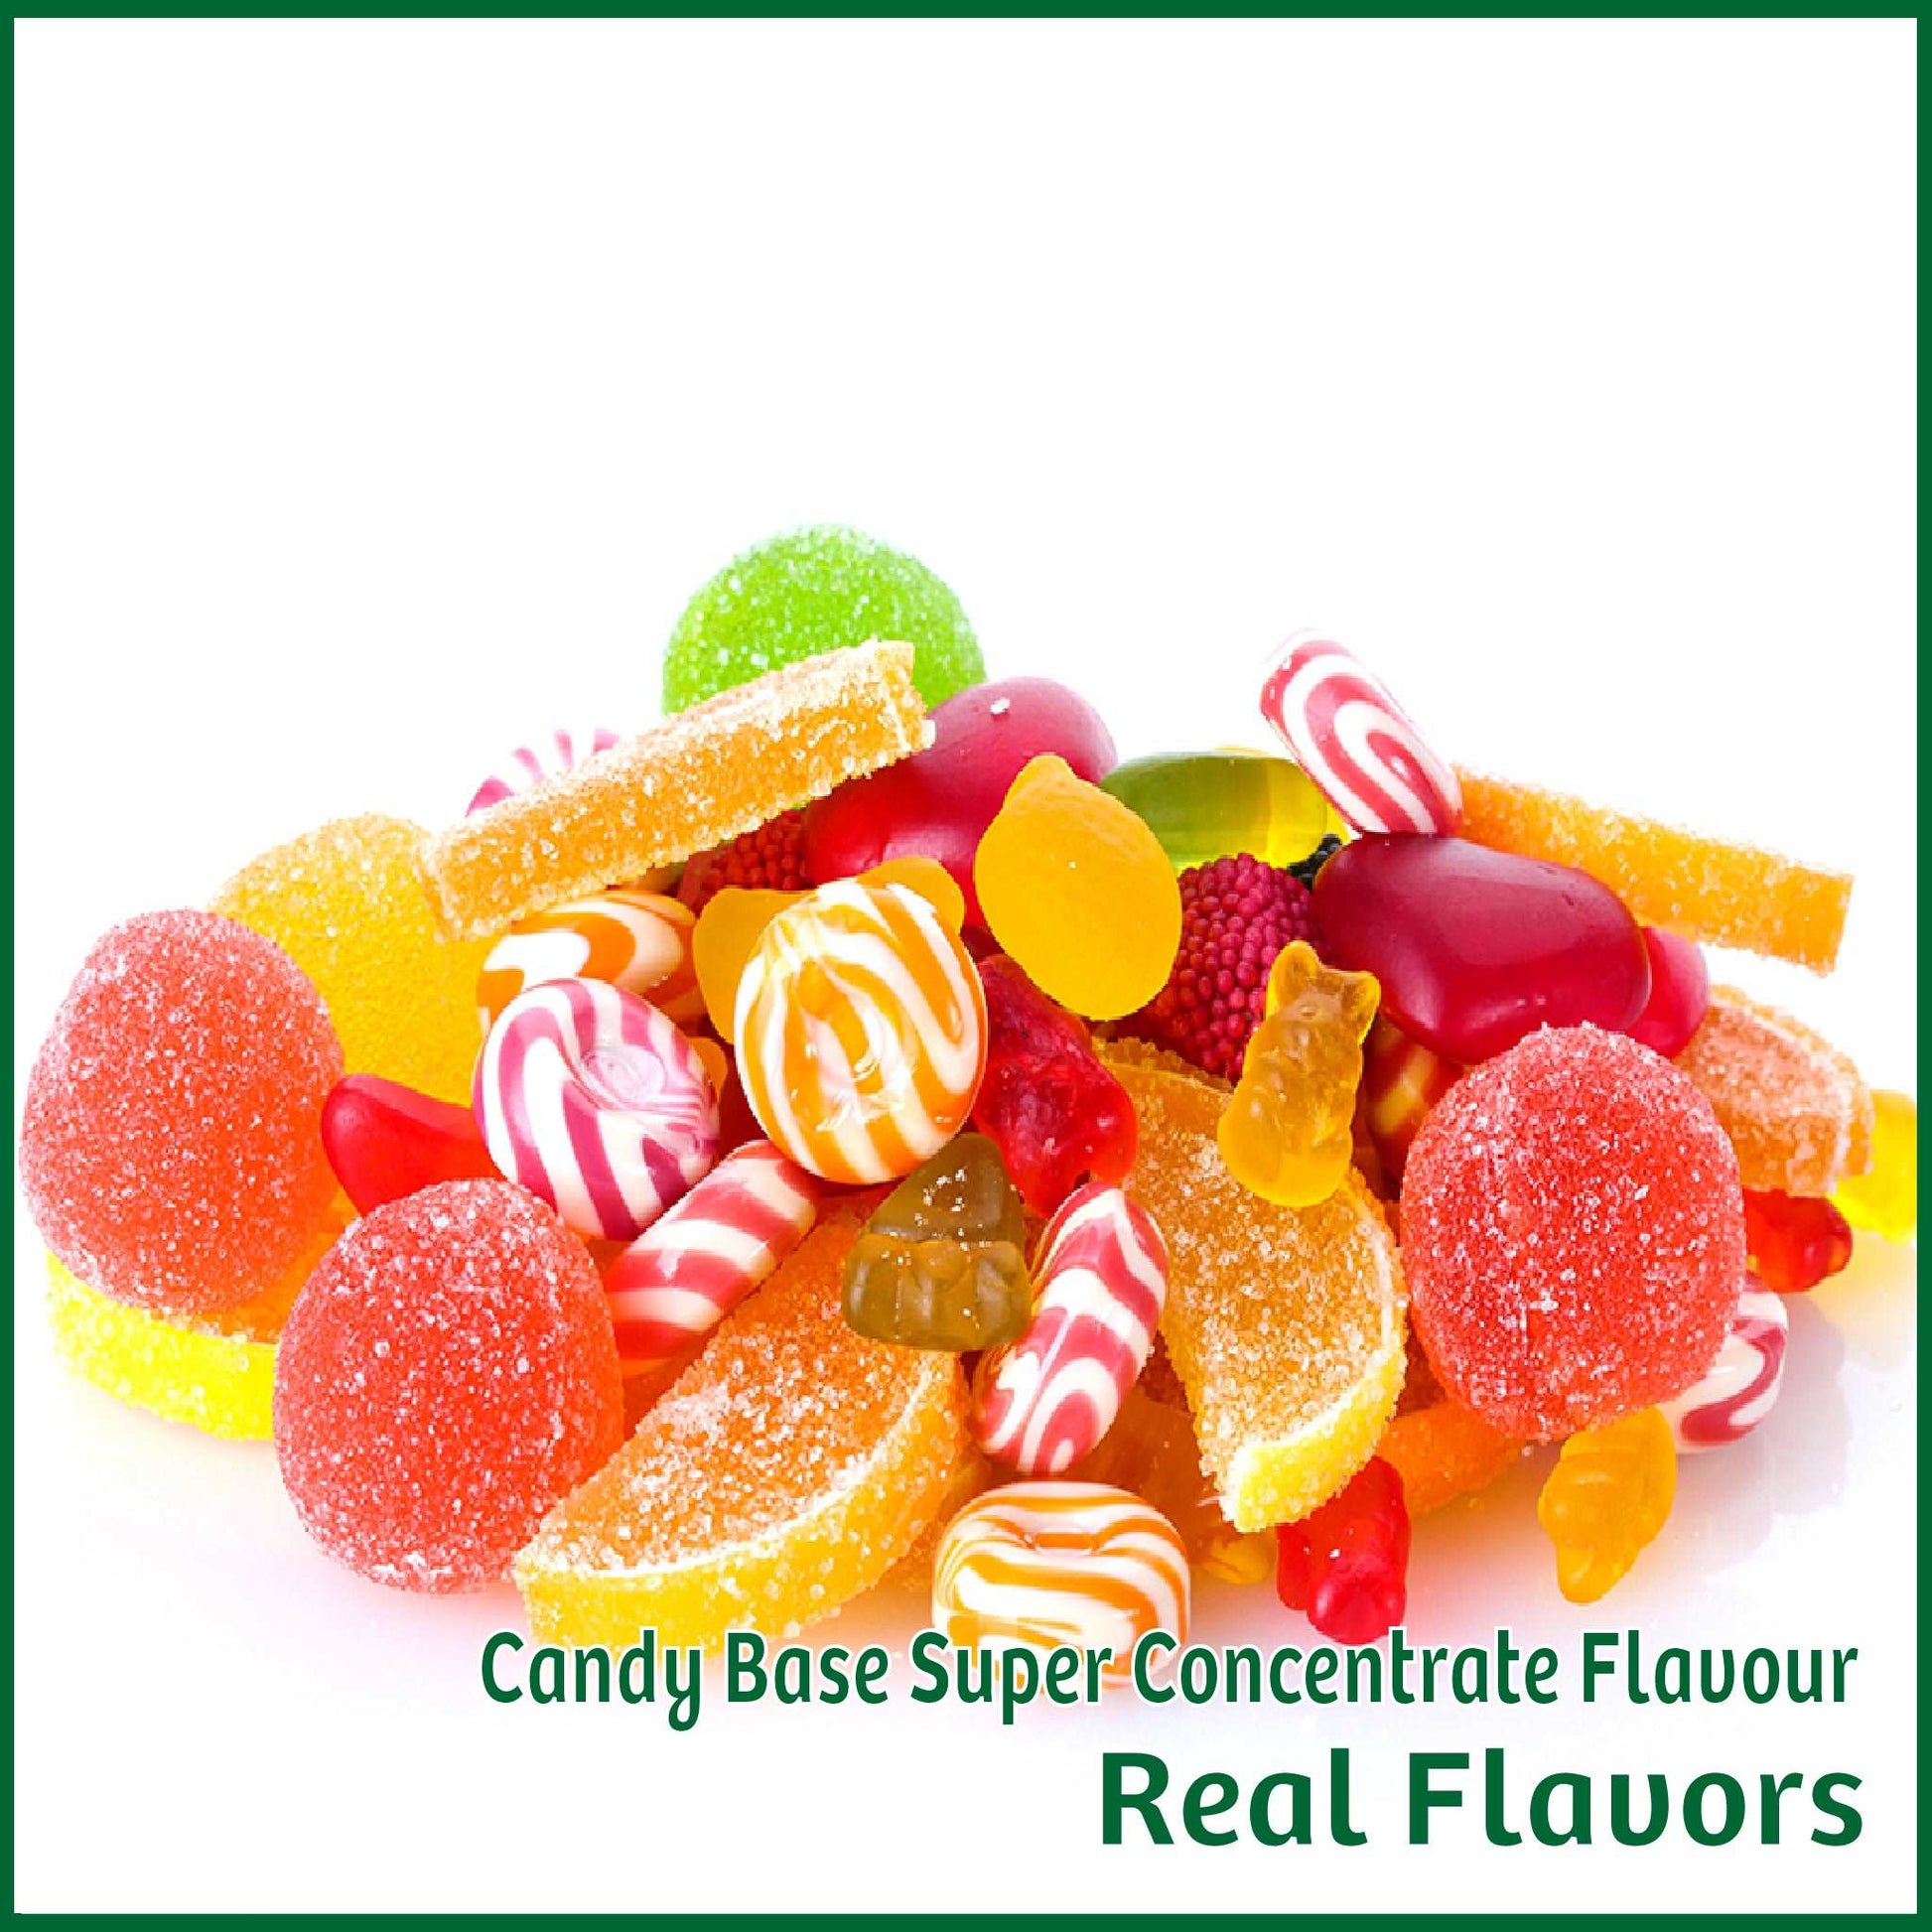 Candy Base Super Concentrate Flavour- Real Flavors - Flavour Fog - Canada's flavour depot.